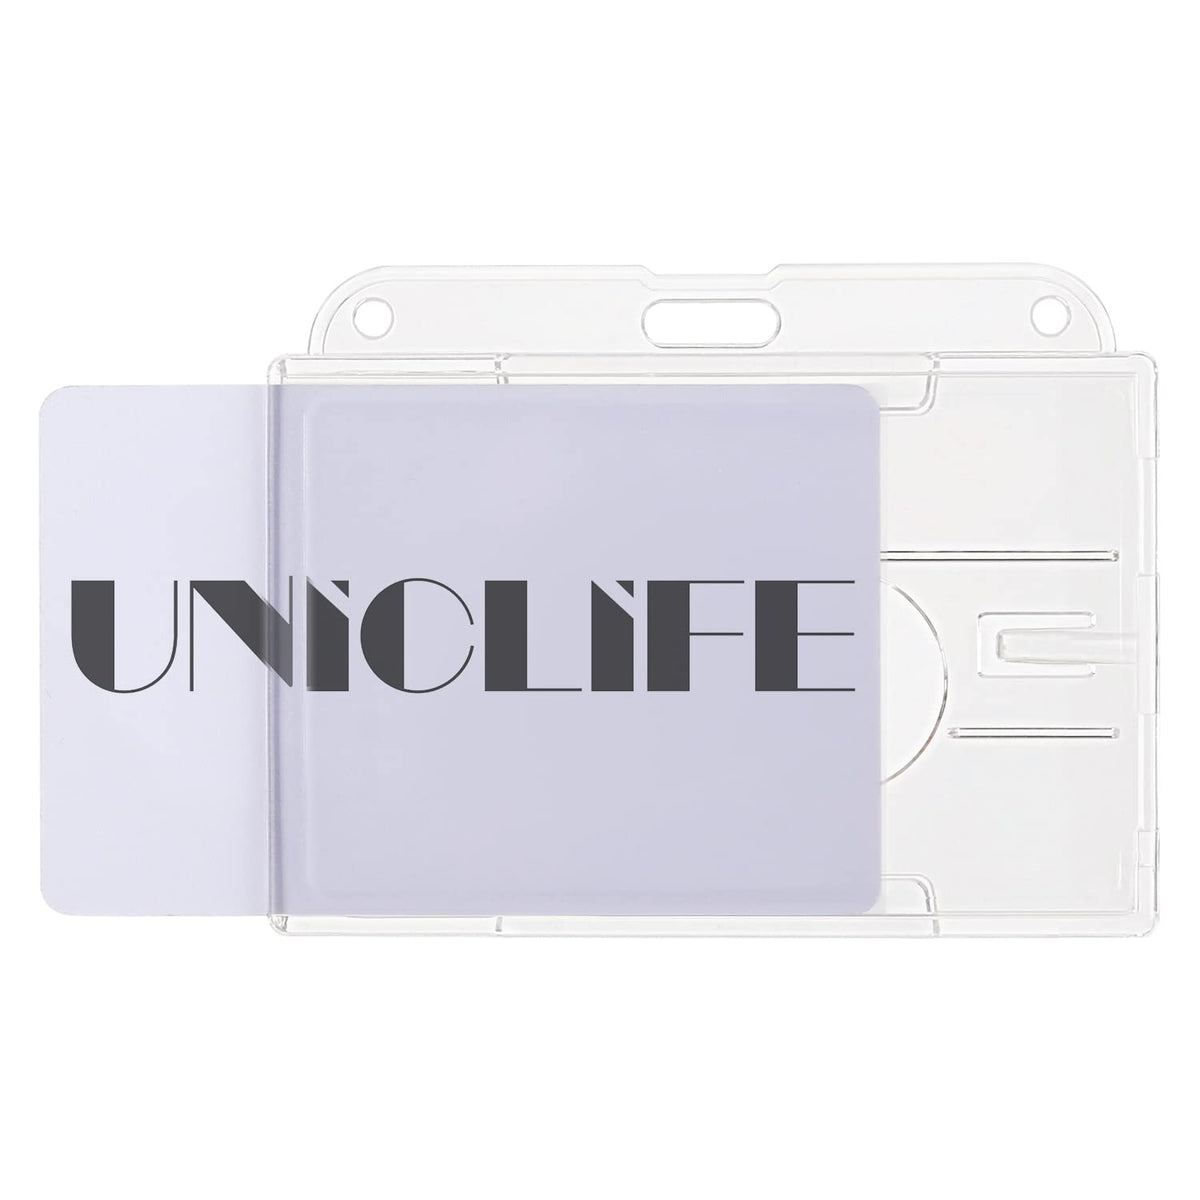 Uniclife Horizontal 2-Card Badge Holder with Thumb Slot Hard Transparent PC Case Protector for Office School IDs Credit Cards Driver’s Licenses and Passes, 2 Pack